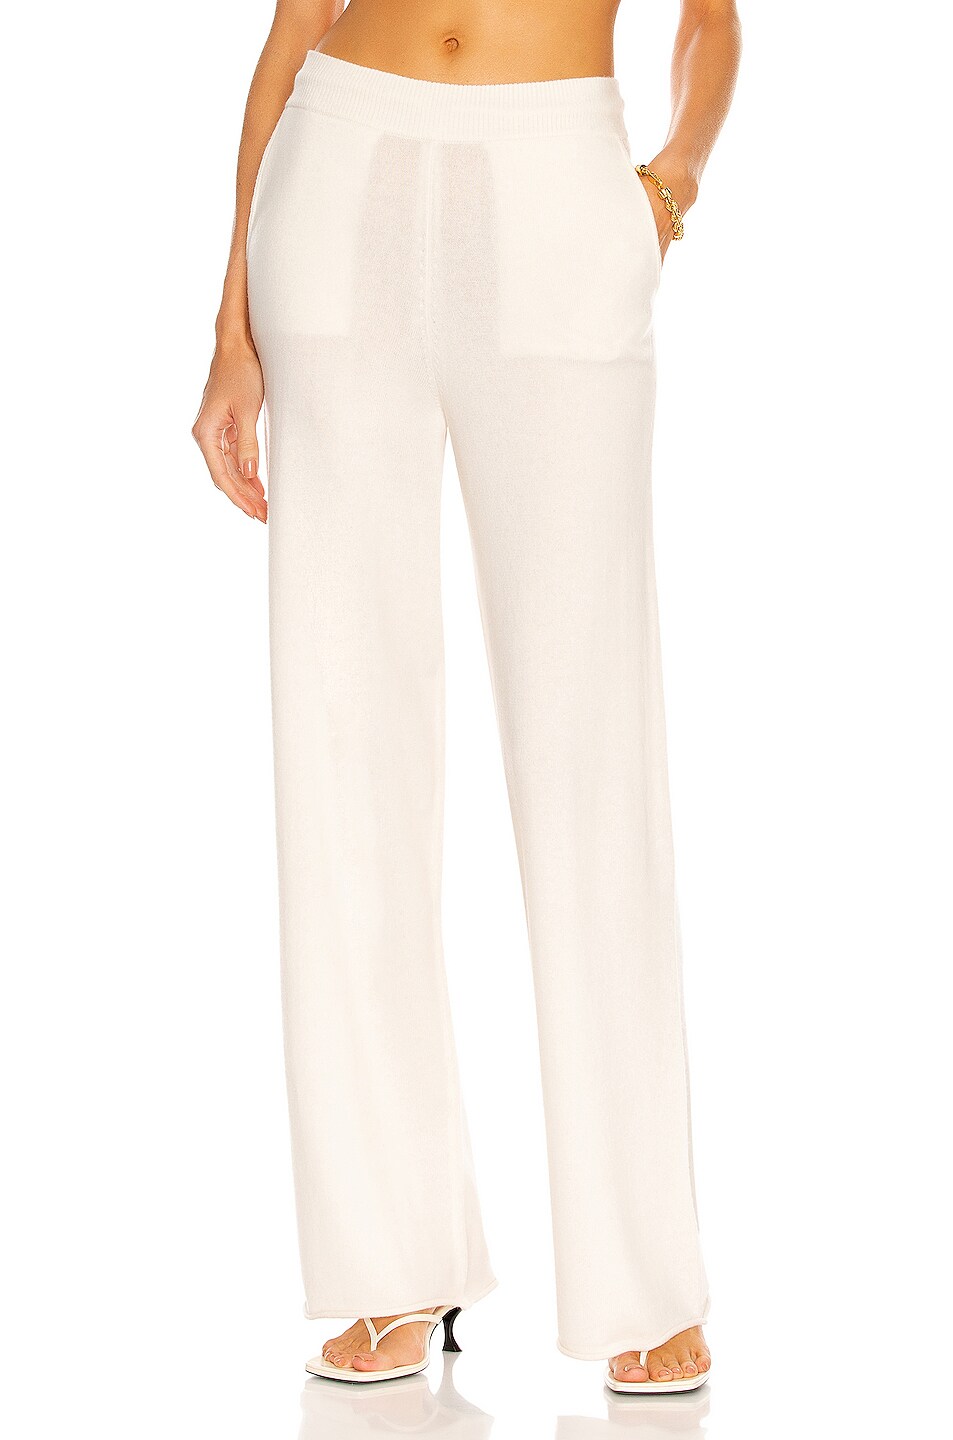 Image 1 of Loulou Studio Tioman Cashmere Pant in ivory